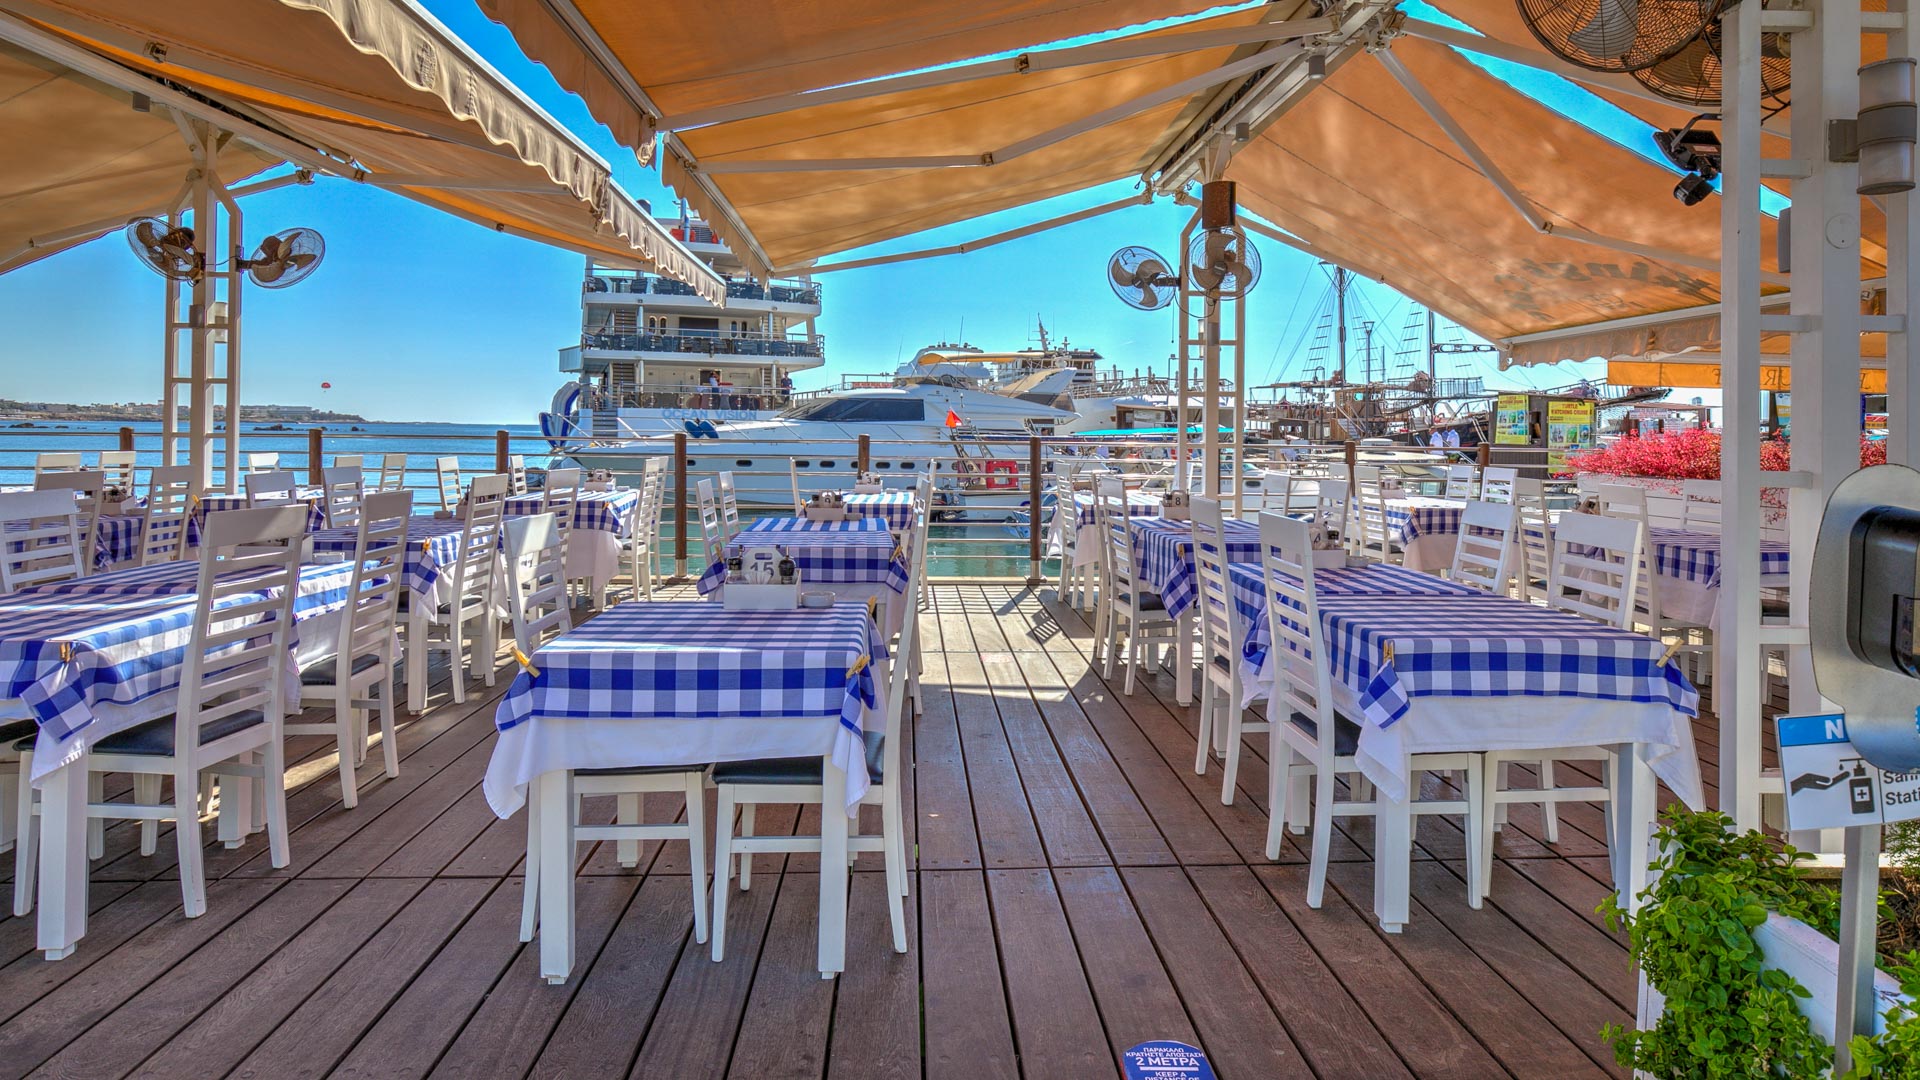 Decked restaurant space with tables set up, overlooking the boats on Paphos harbour.